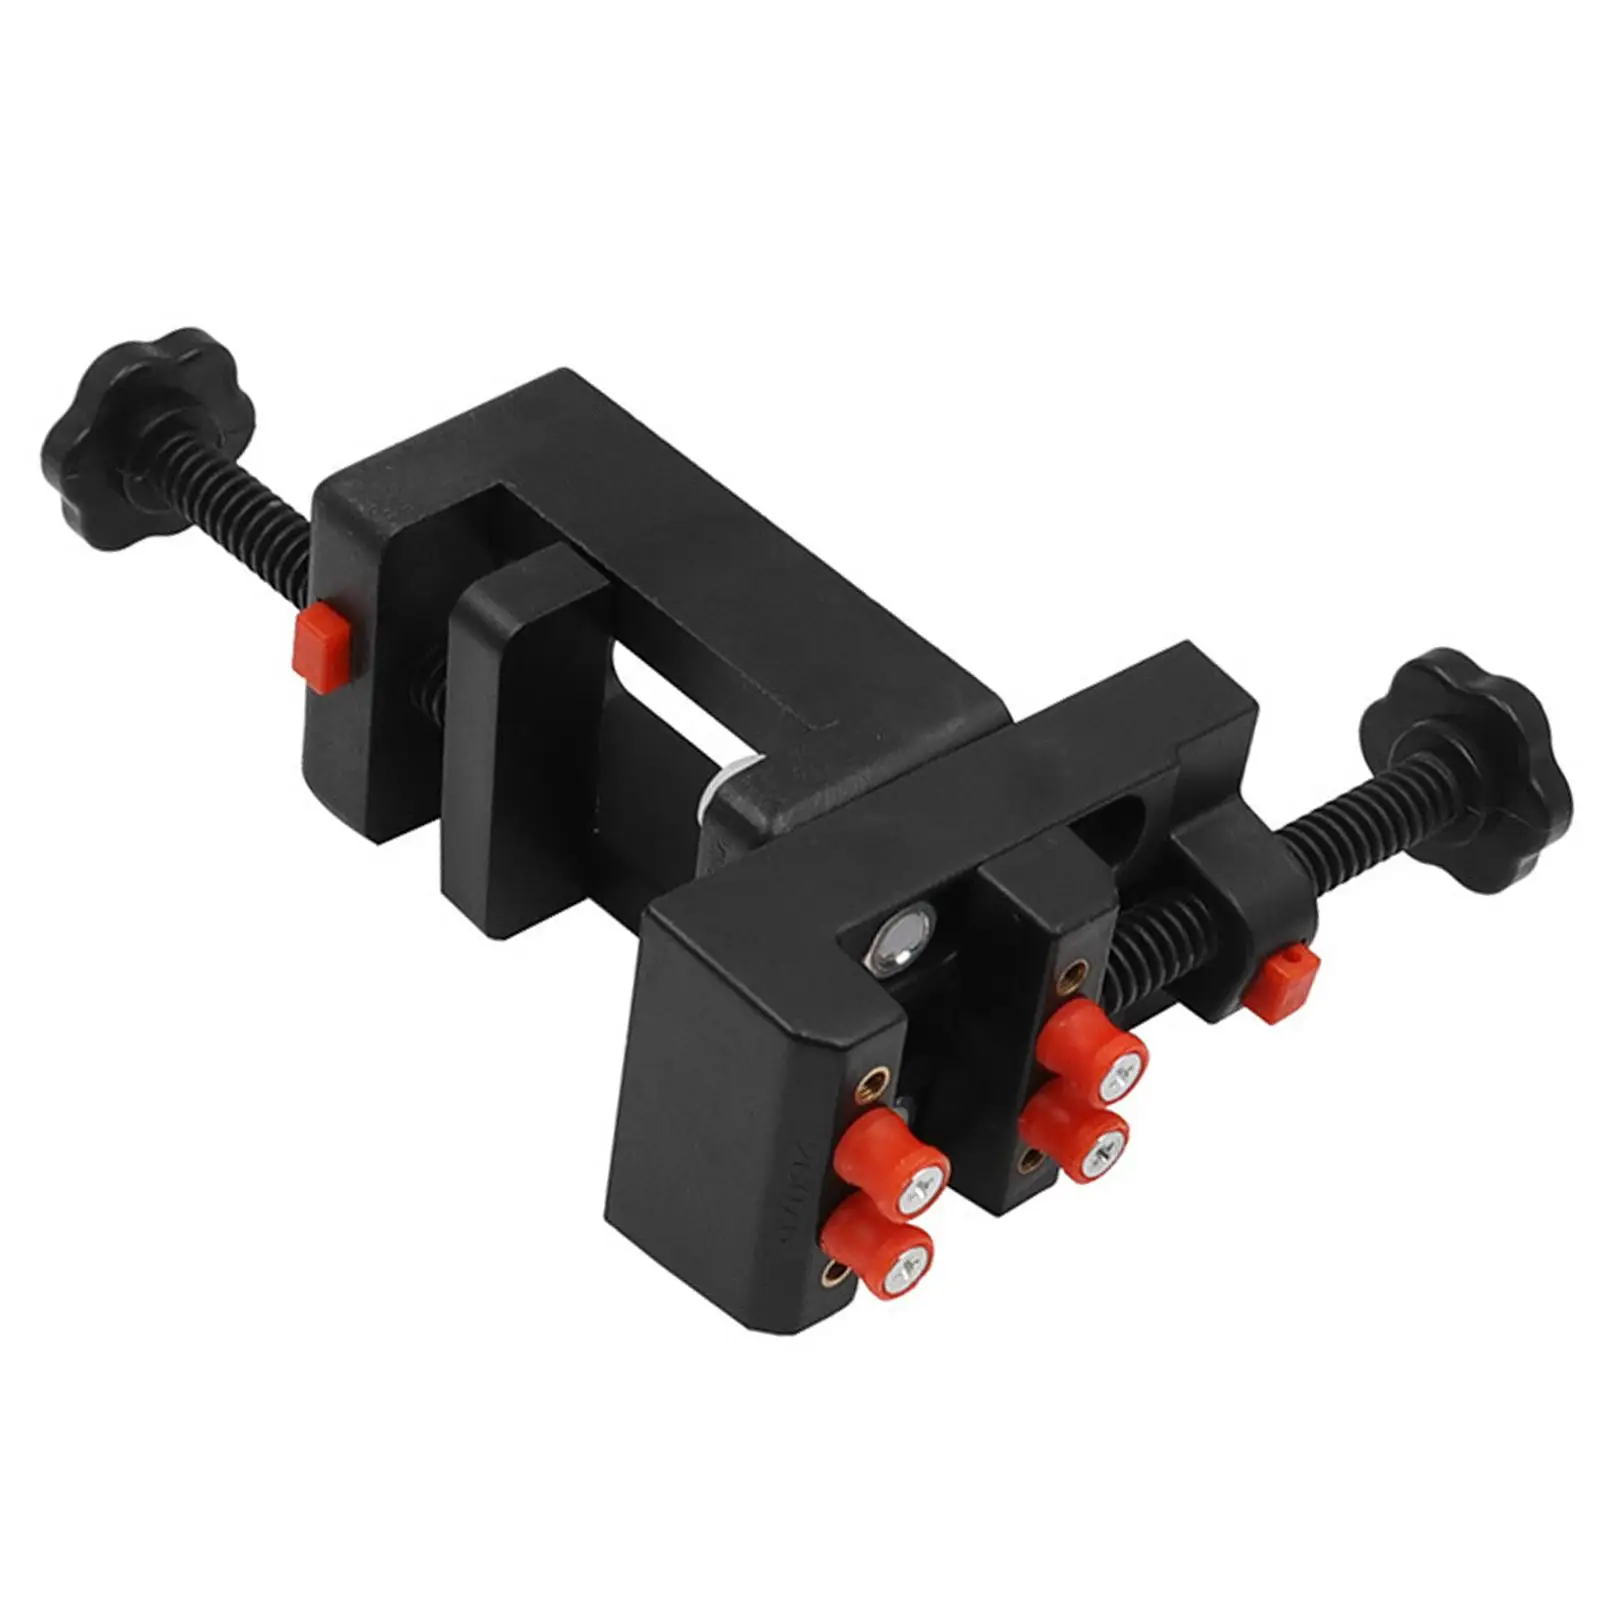 Portable Tabletop Clamp Vice Clamp On Vise Woodworking Clamps Model Making Vise for Building Work Metalworking Jewelry Making